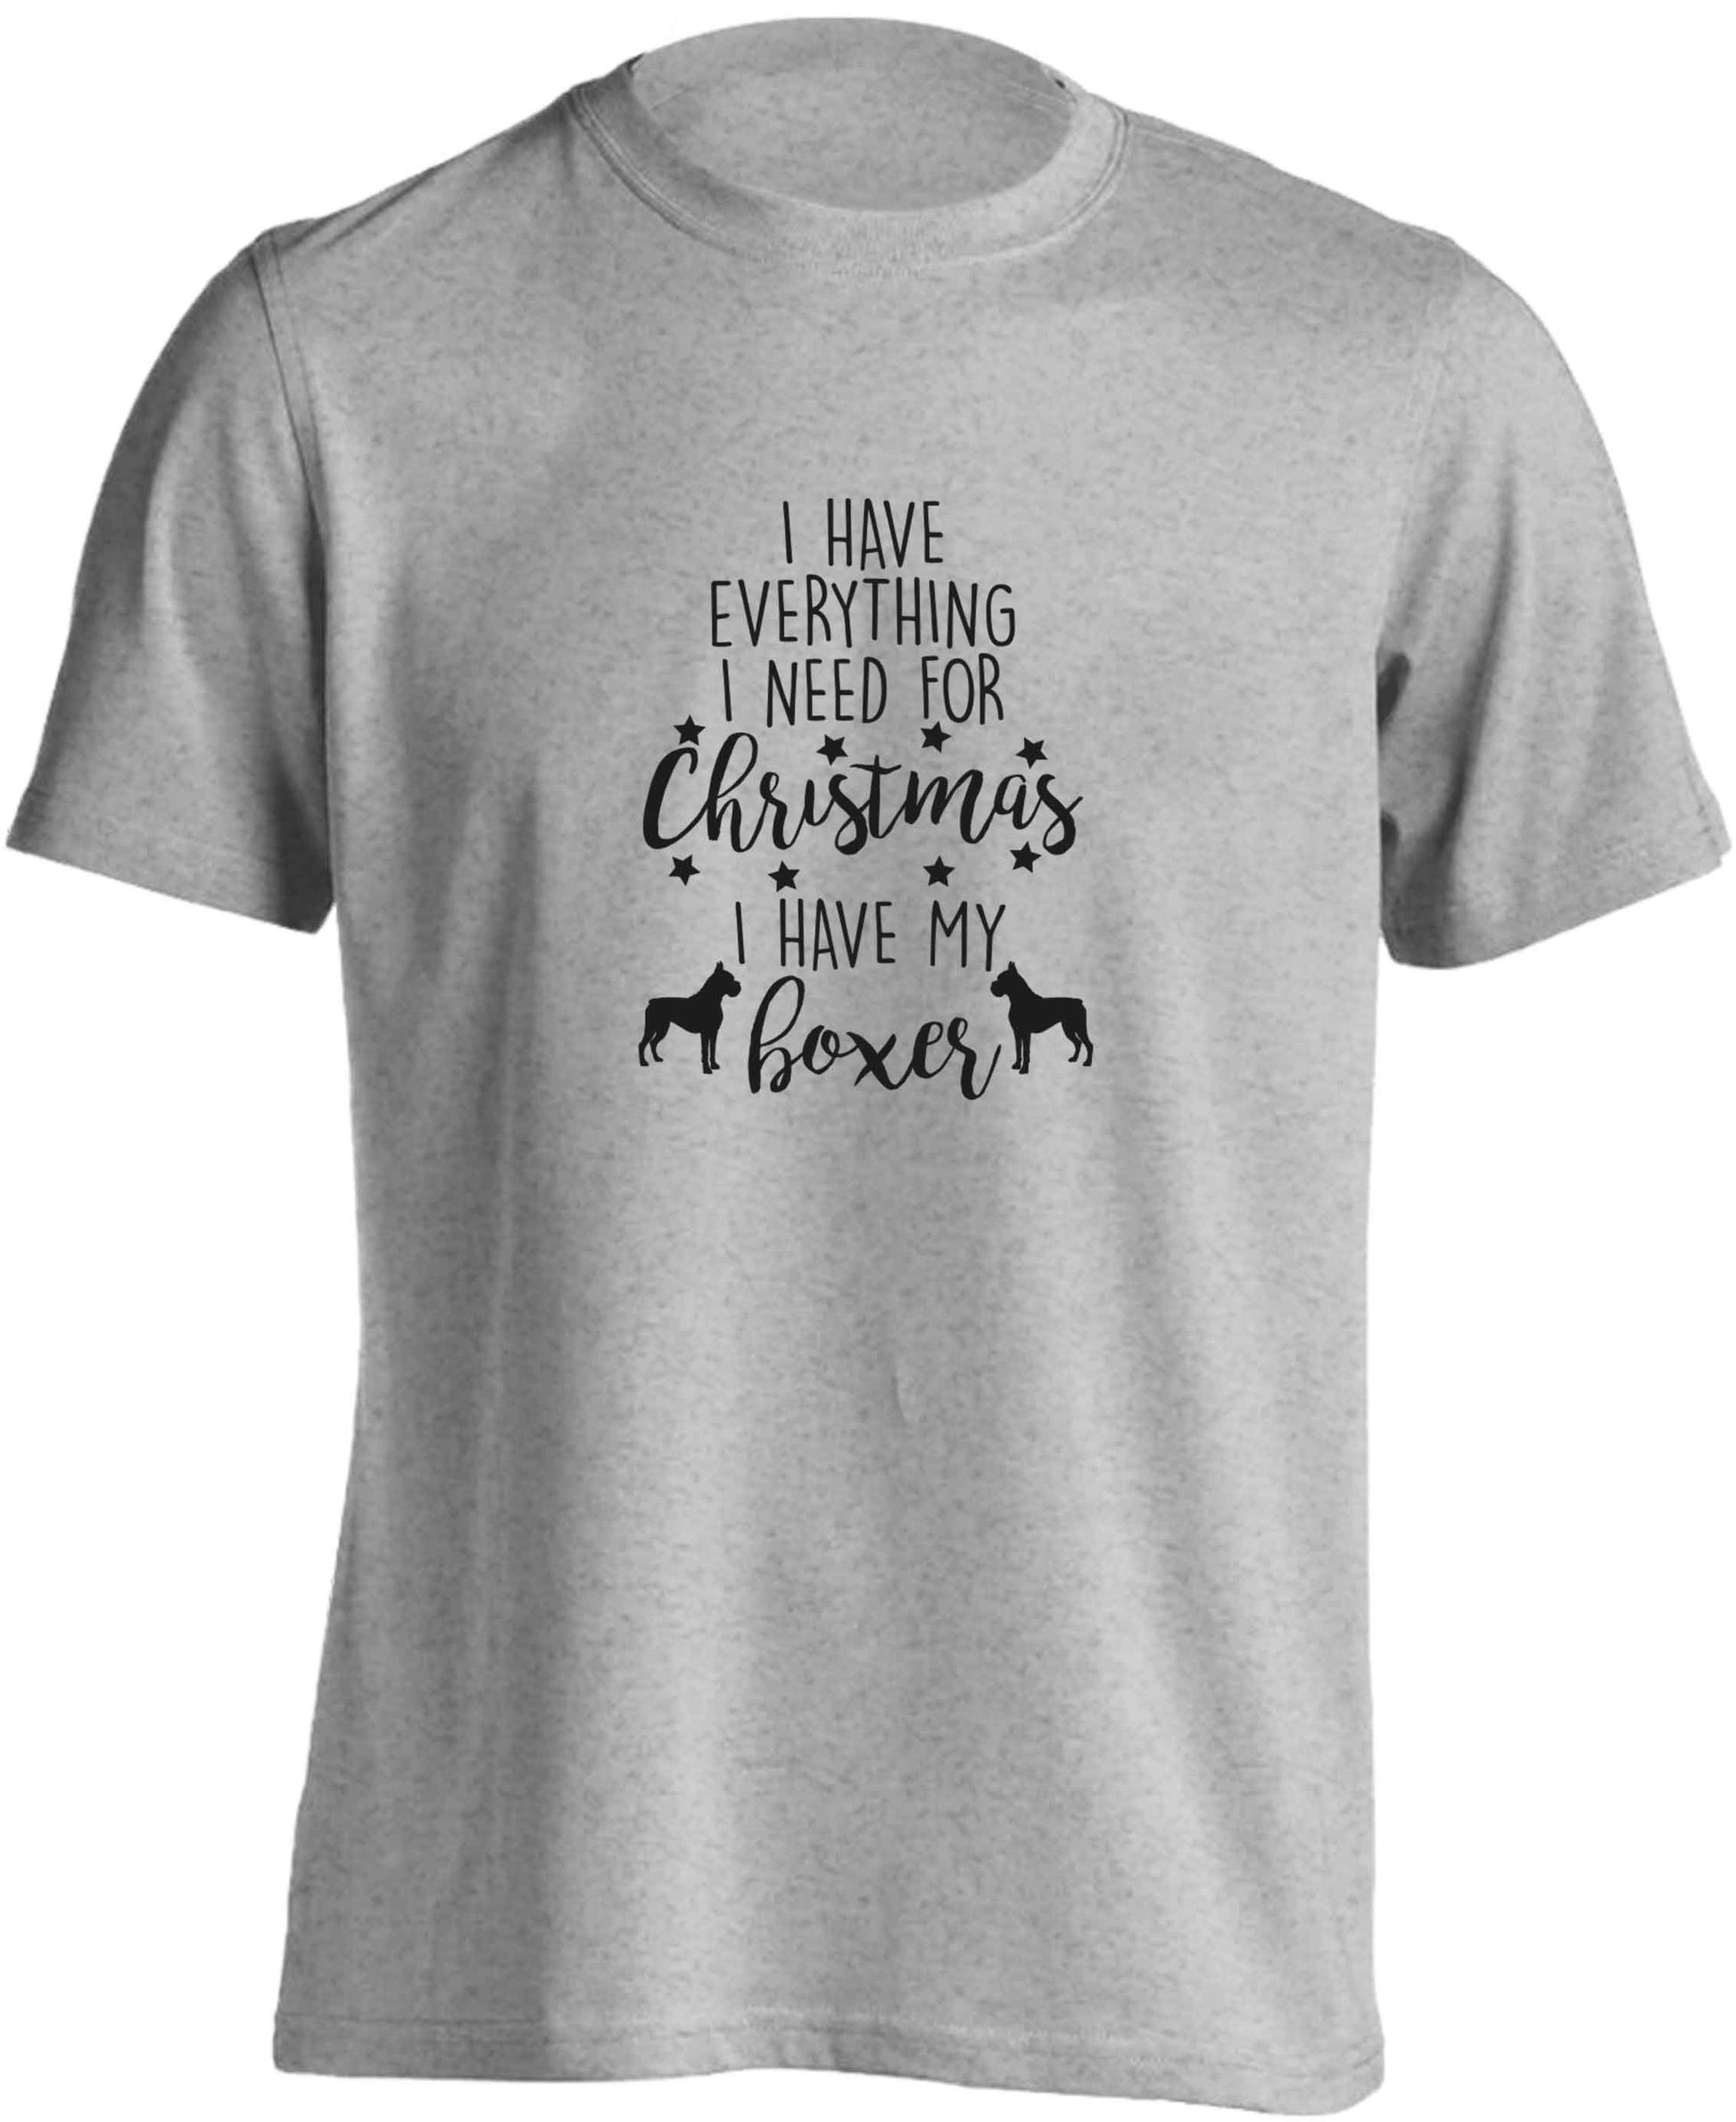 I have everything I need for Christmas I have my boxer adults unisex grey Tshirt 2XL